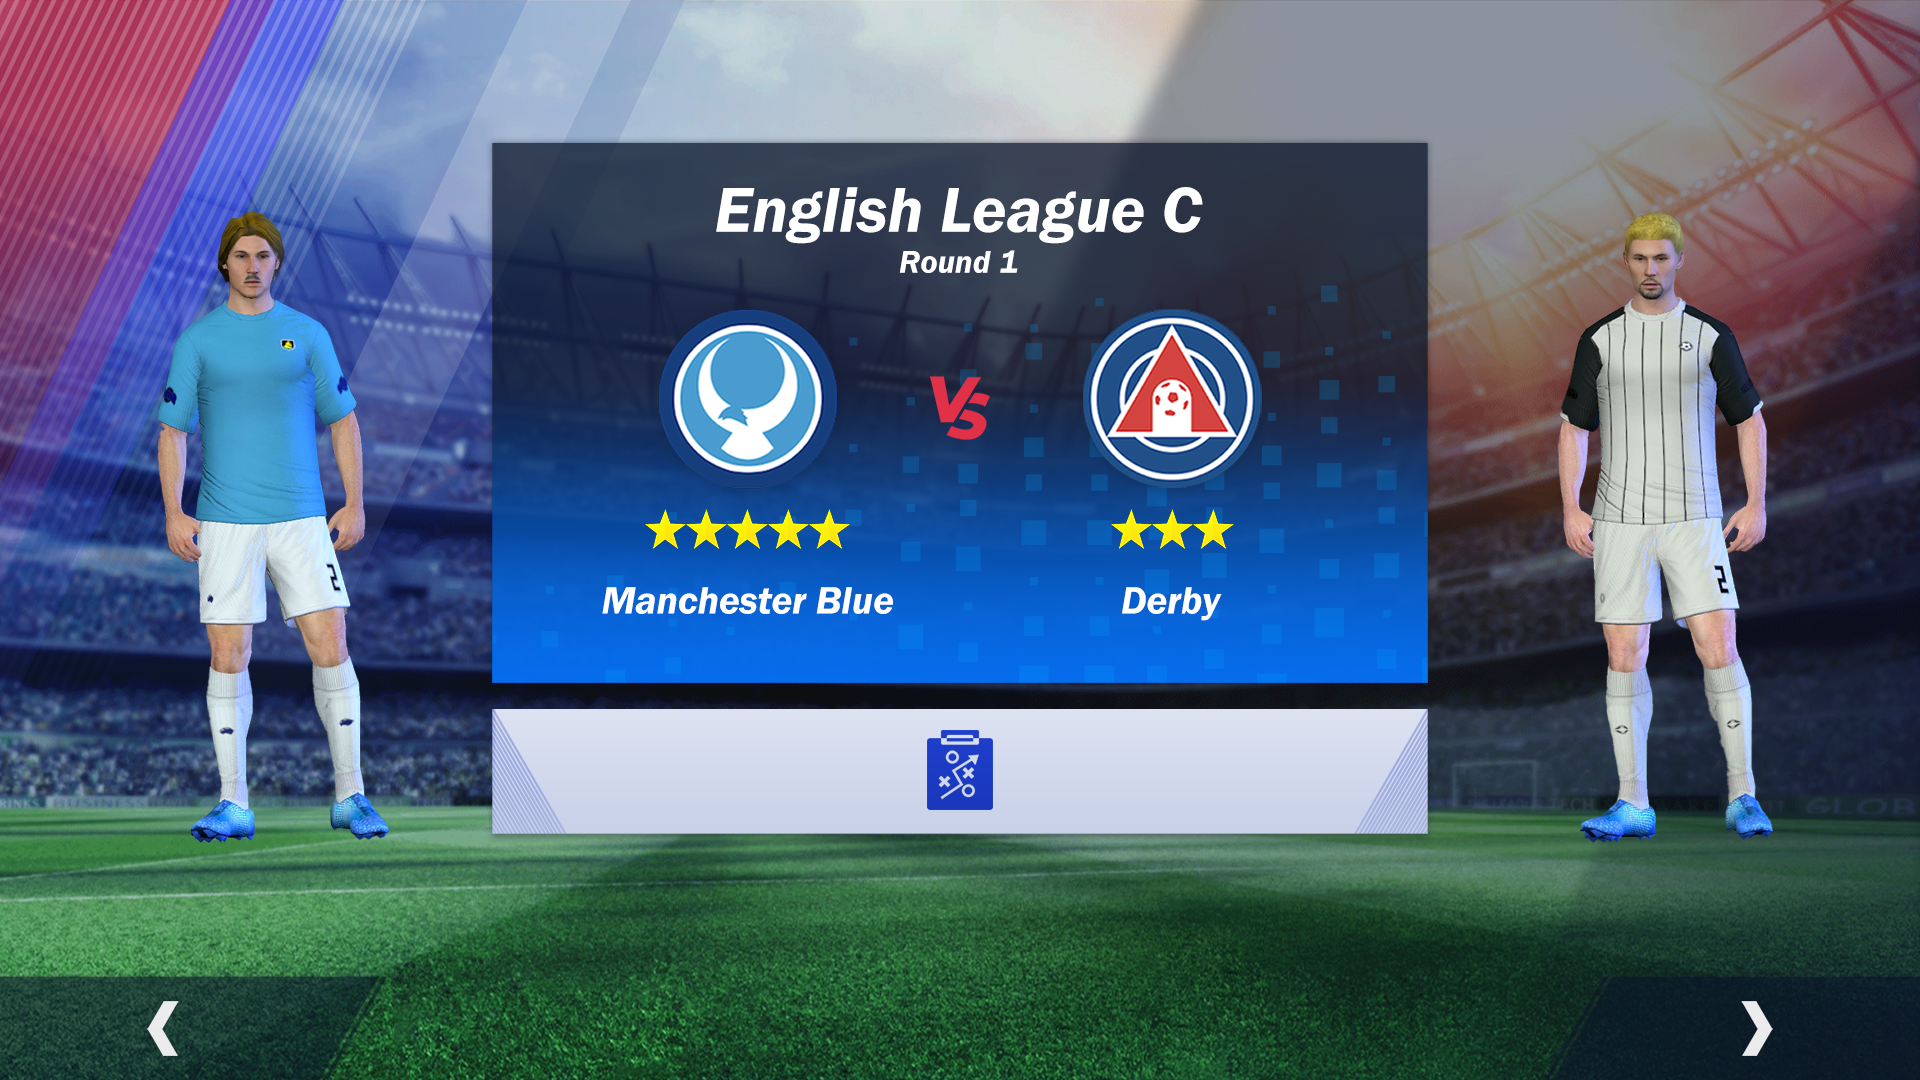 Football League 2023 APK for Android - Download